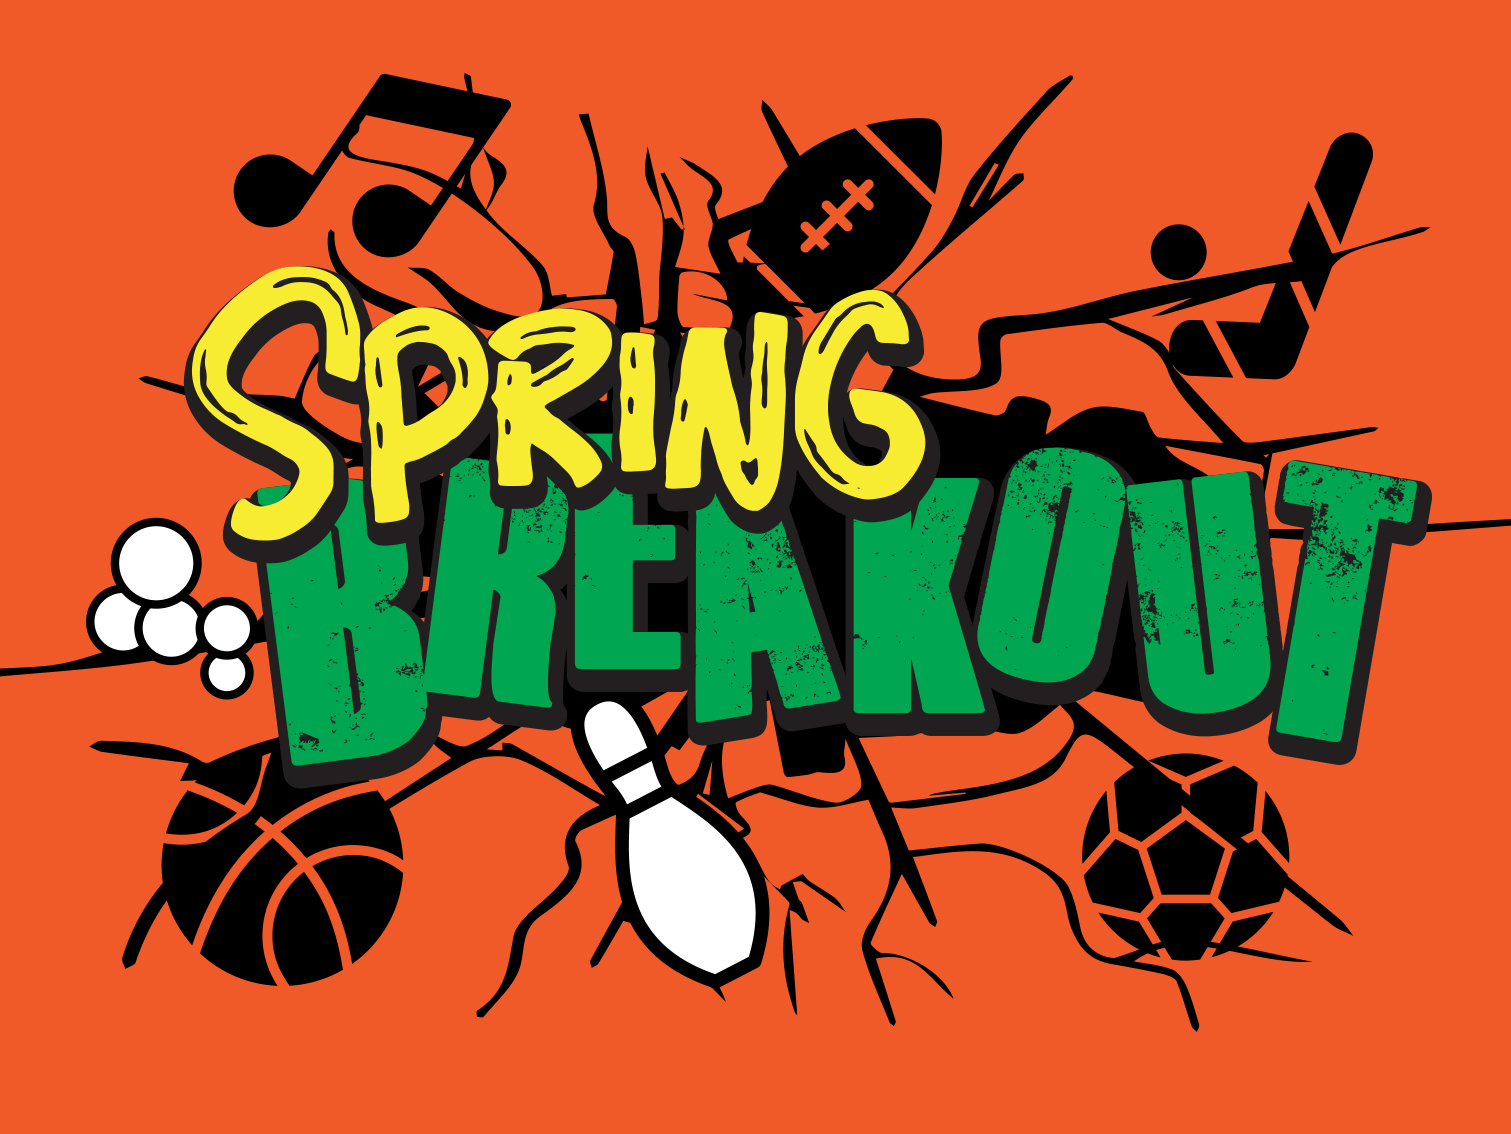 Spring Breakout happens on March 29, 2021 on the Nebraska Union plaza and green space.